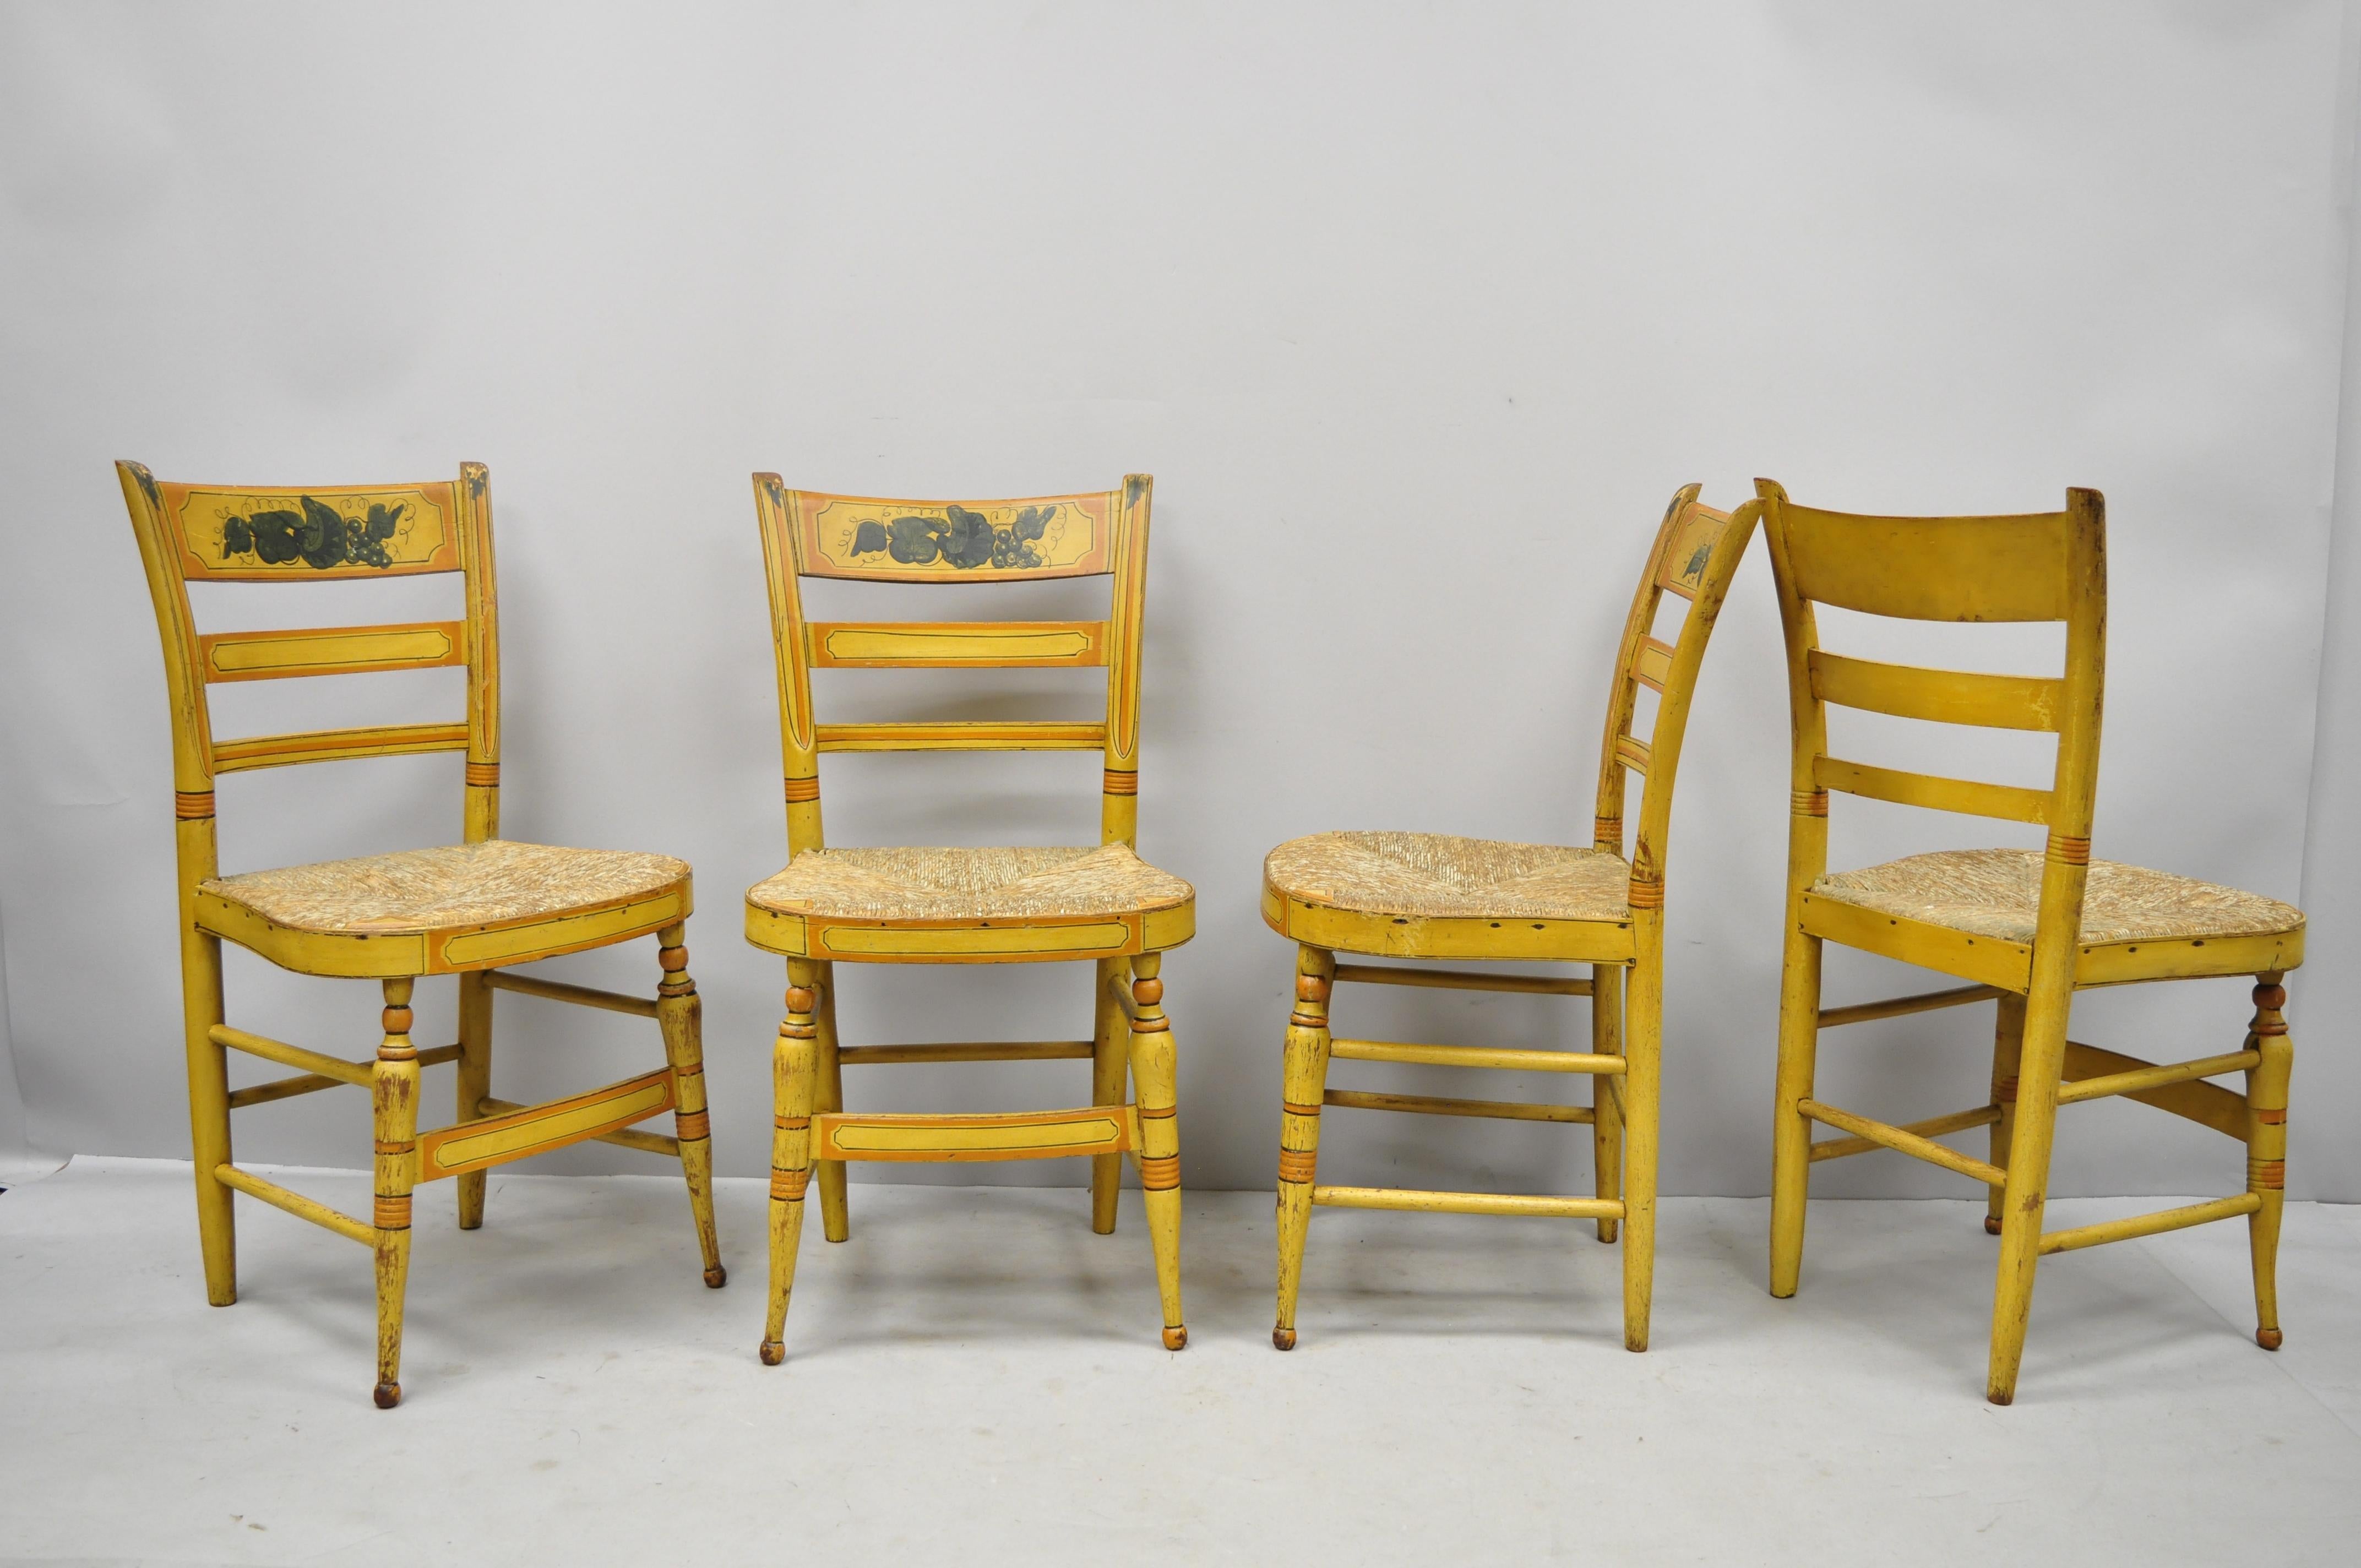 4 early 19th century bentwood slat back rush seat yellow paint stenciled dining chairs. Listing includes oven rush seats, hand painted frames, green, yellow and, orange finish, solid wood frame, nicely carved details, very nice antique item, quality